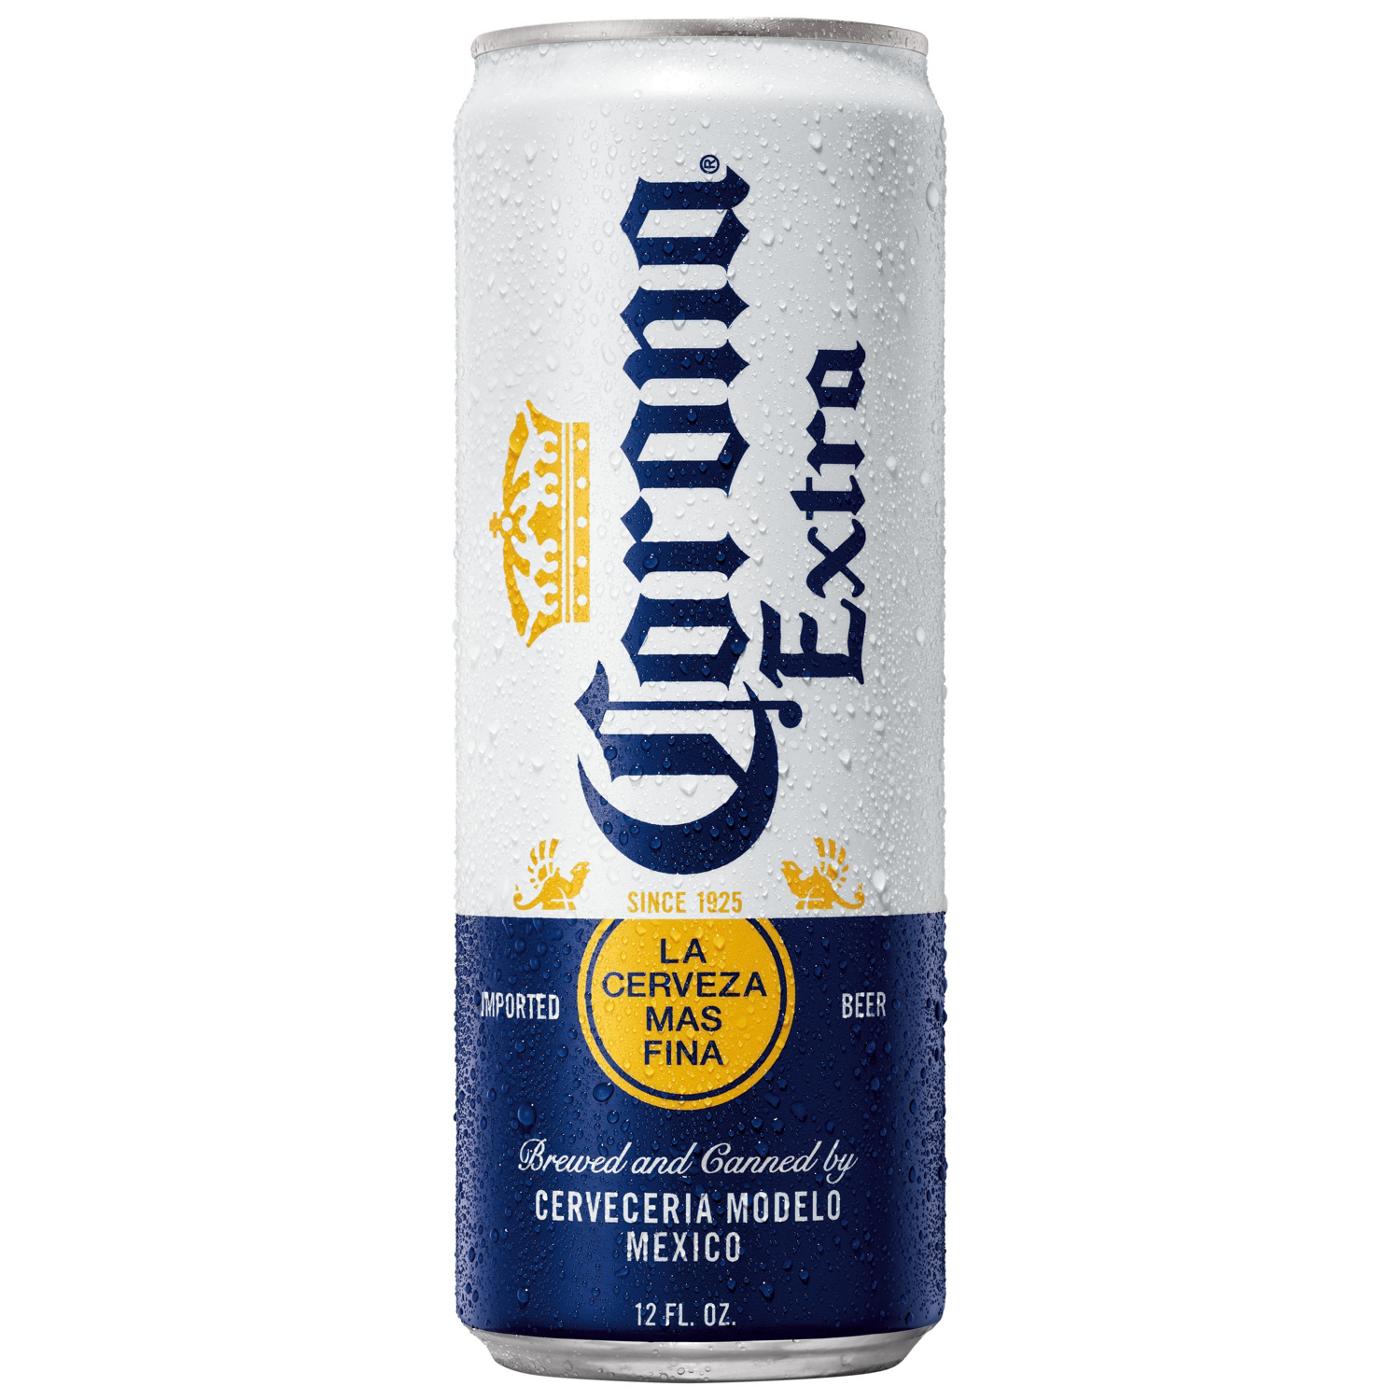 Corona Extra Mexican Lager Import Beer 12 oz Cans, 12 pk; image 6 of 6